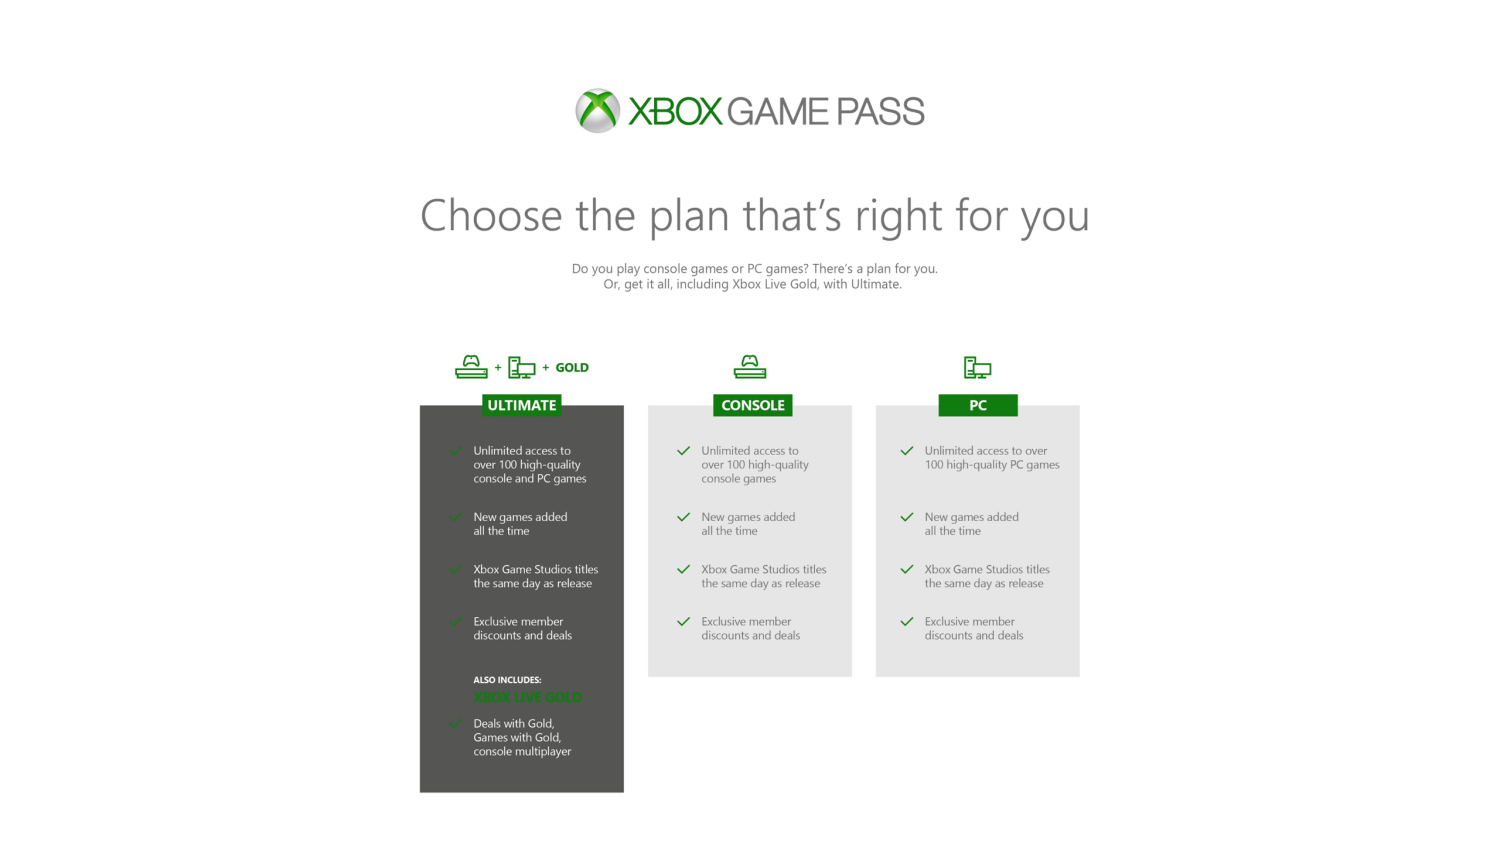 Microsoft claims Xbox Game Pass price won't rise post Activision